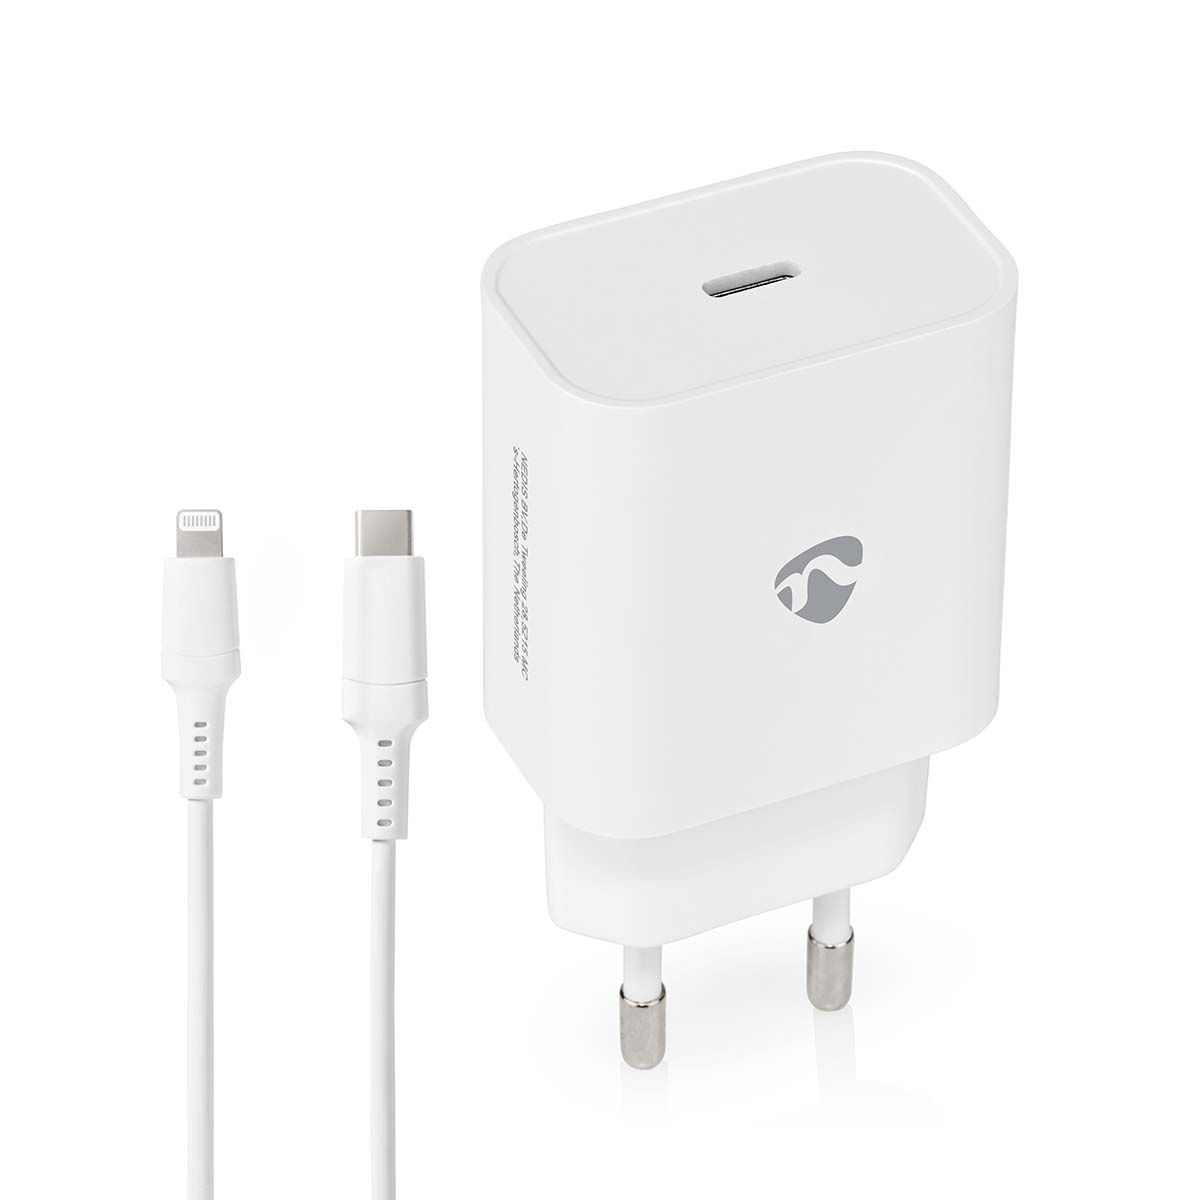 DURATA Chargeur rapide Iphone Blanc USB Type-C